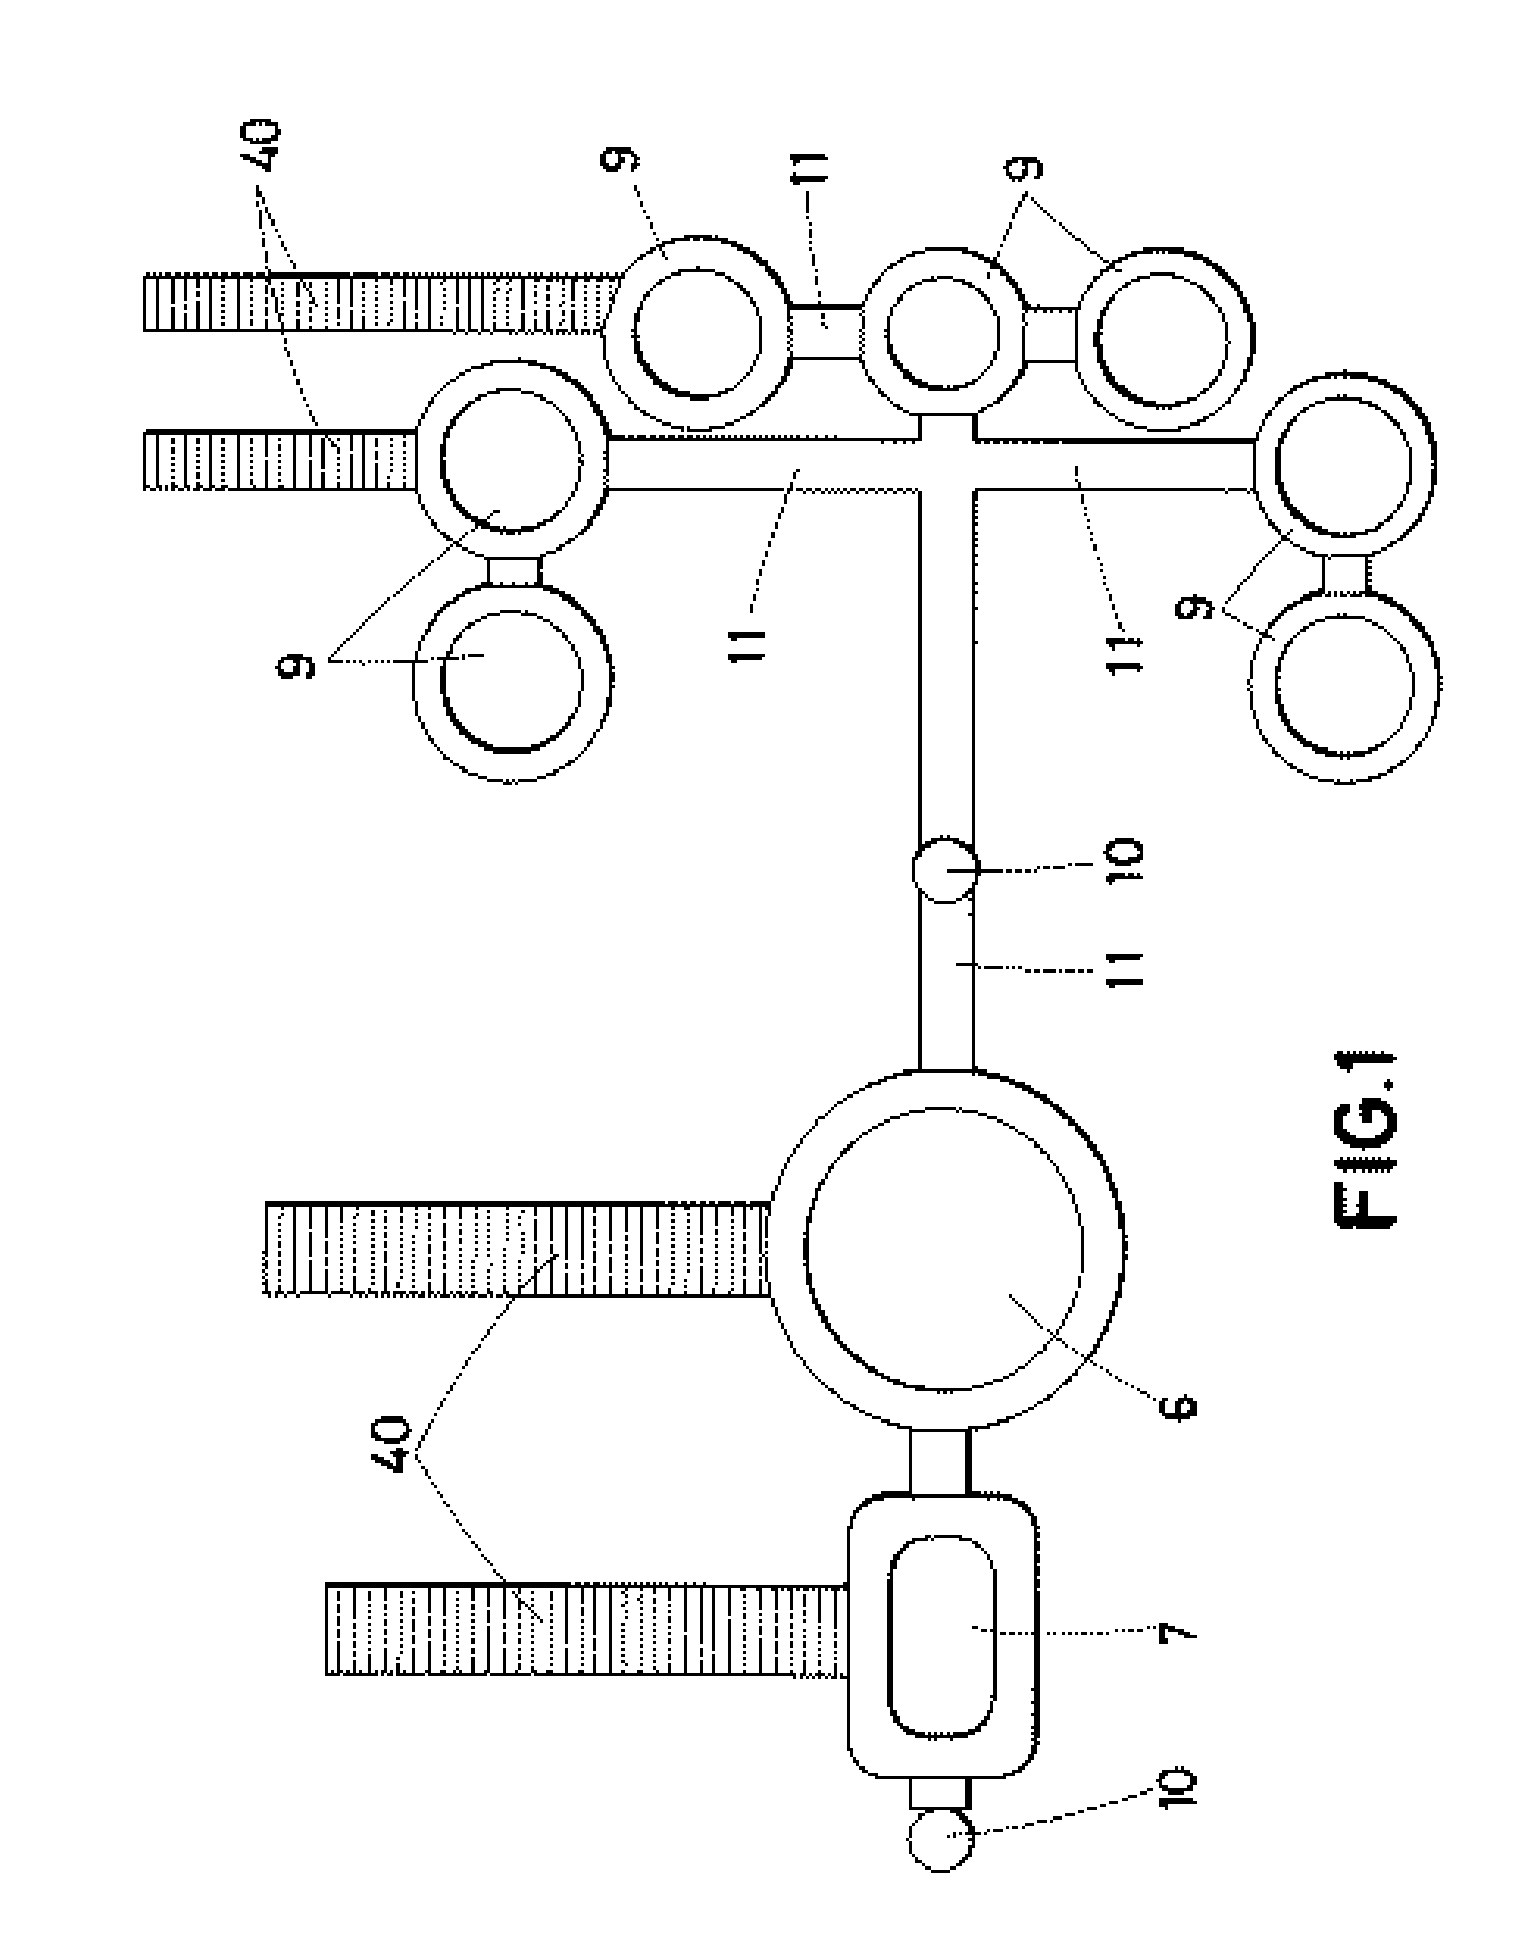 Nuclear power plant, safety system with fuse element and gravity elevator